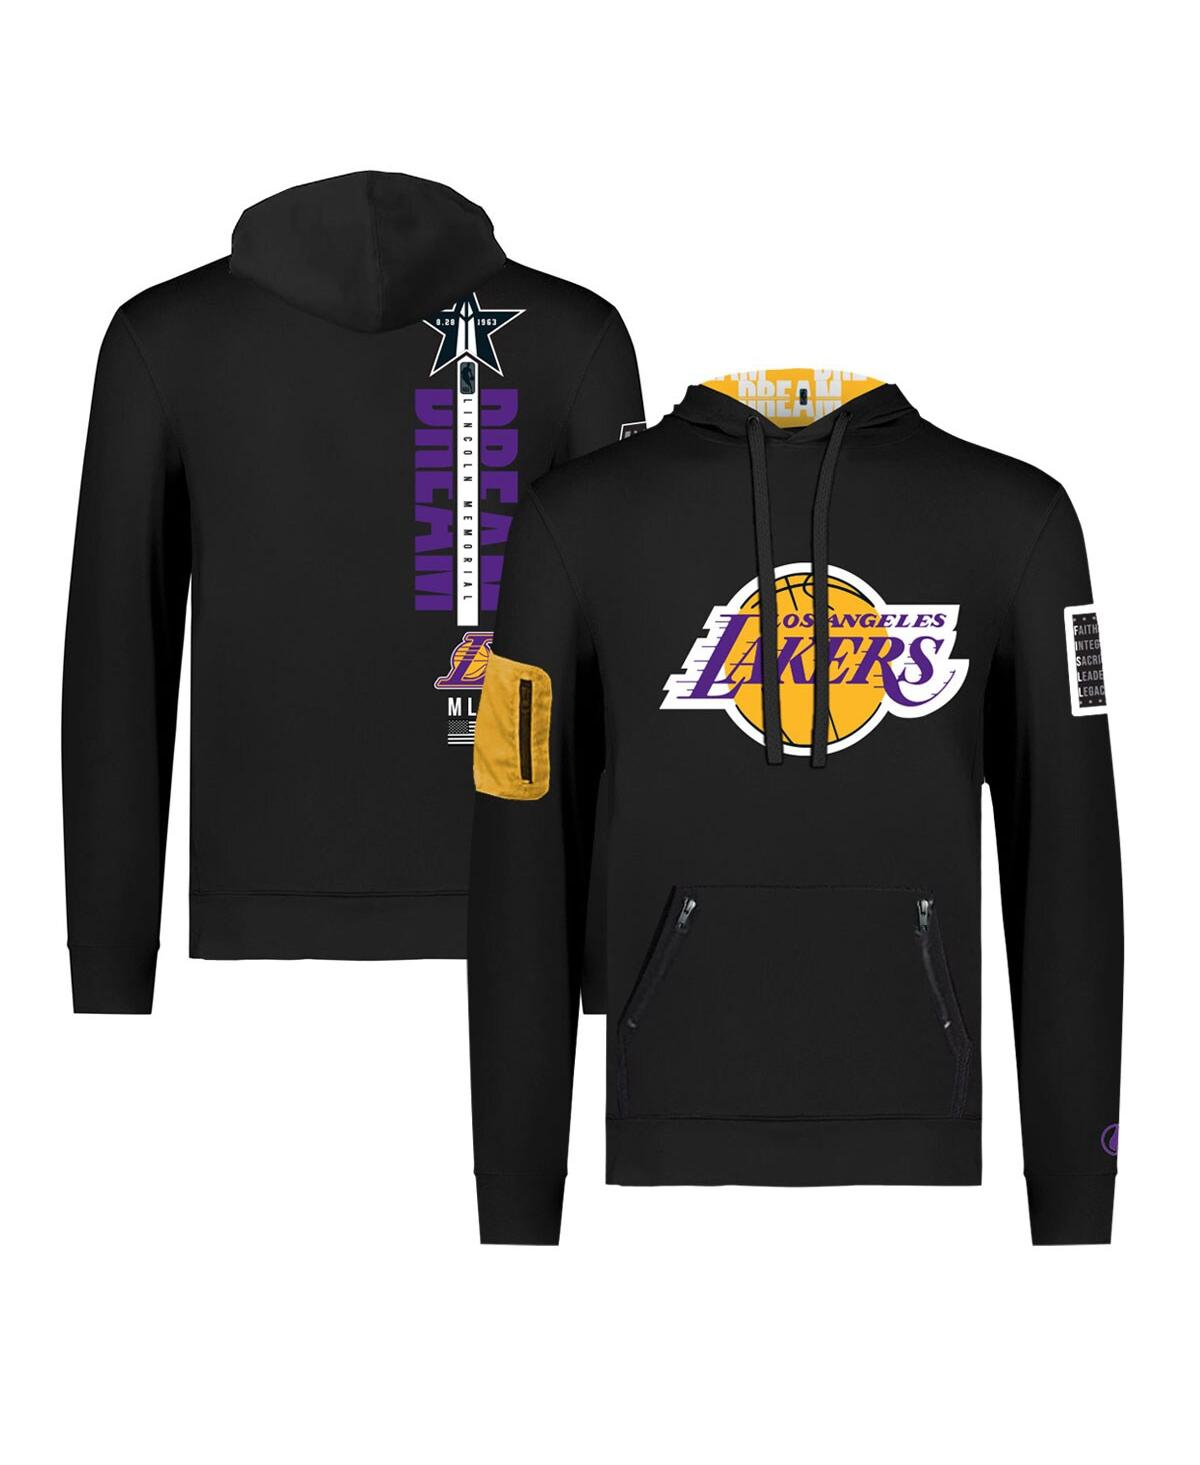 Men's and Women's Fisll x Black History Collection Black Los Angeles Lakers Pullover Hoodie - Black